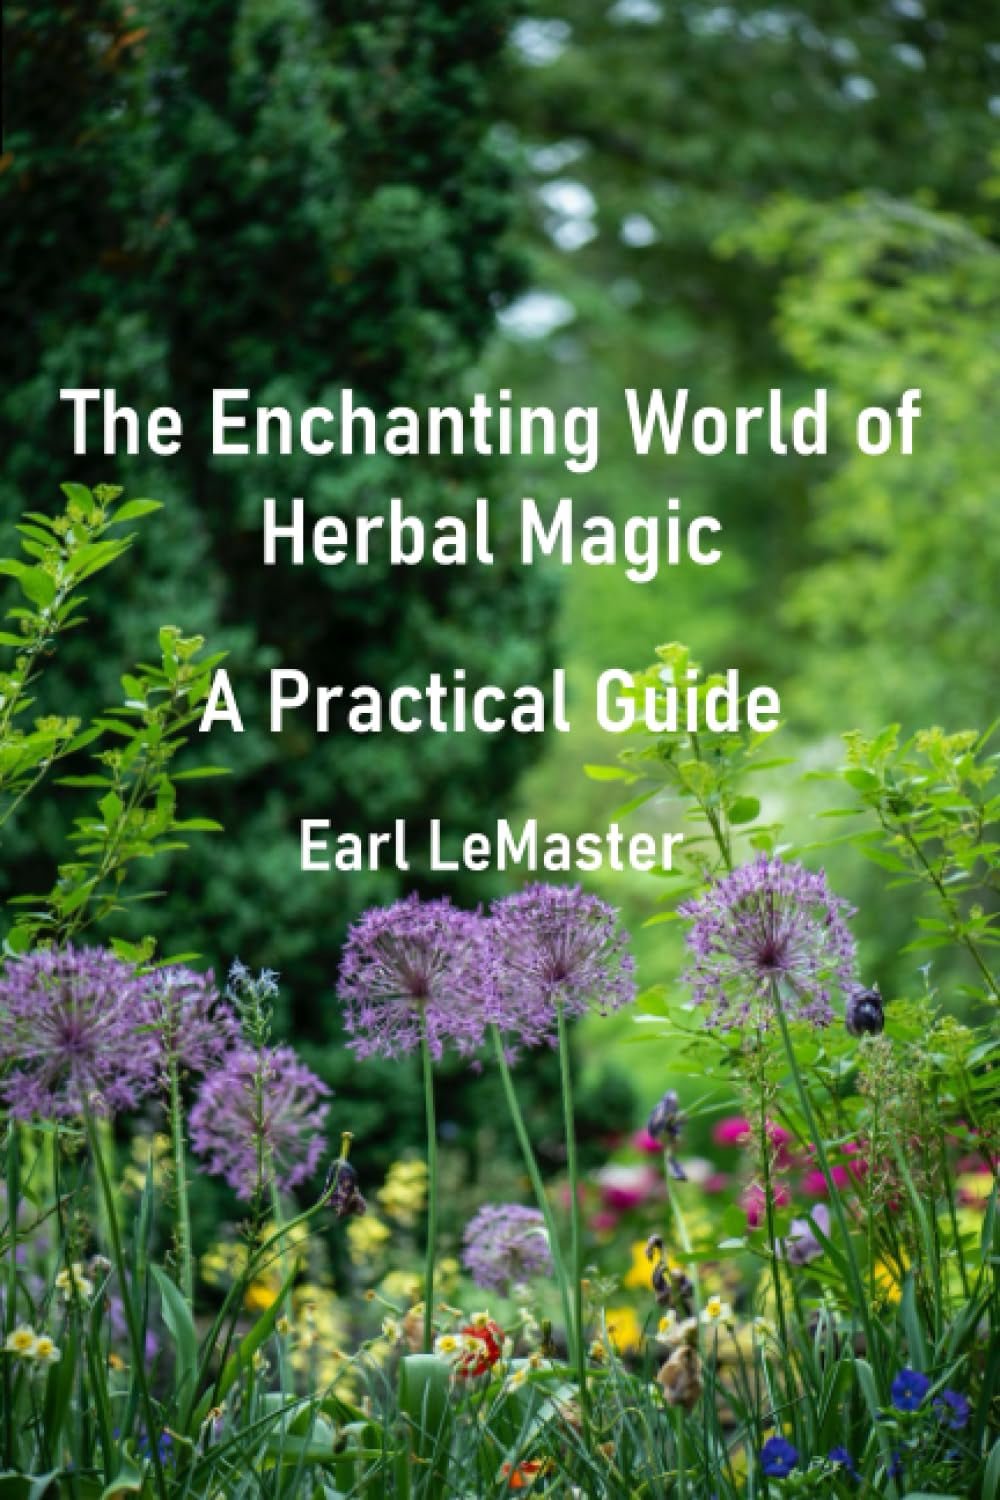 The Enchanting World of Herbal Magic: A Practical Guide